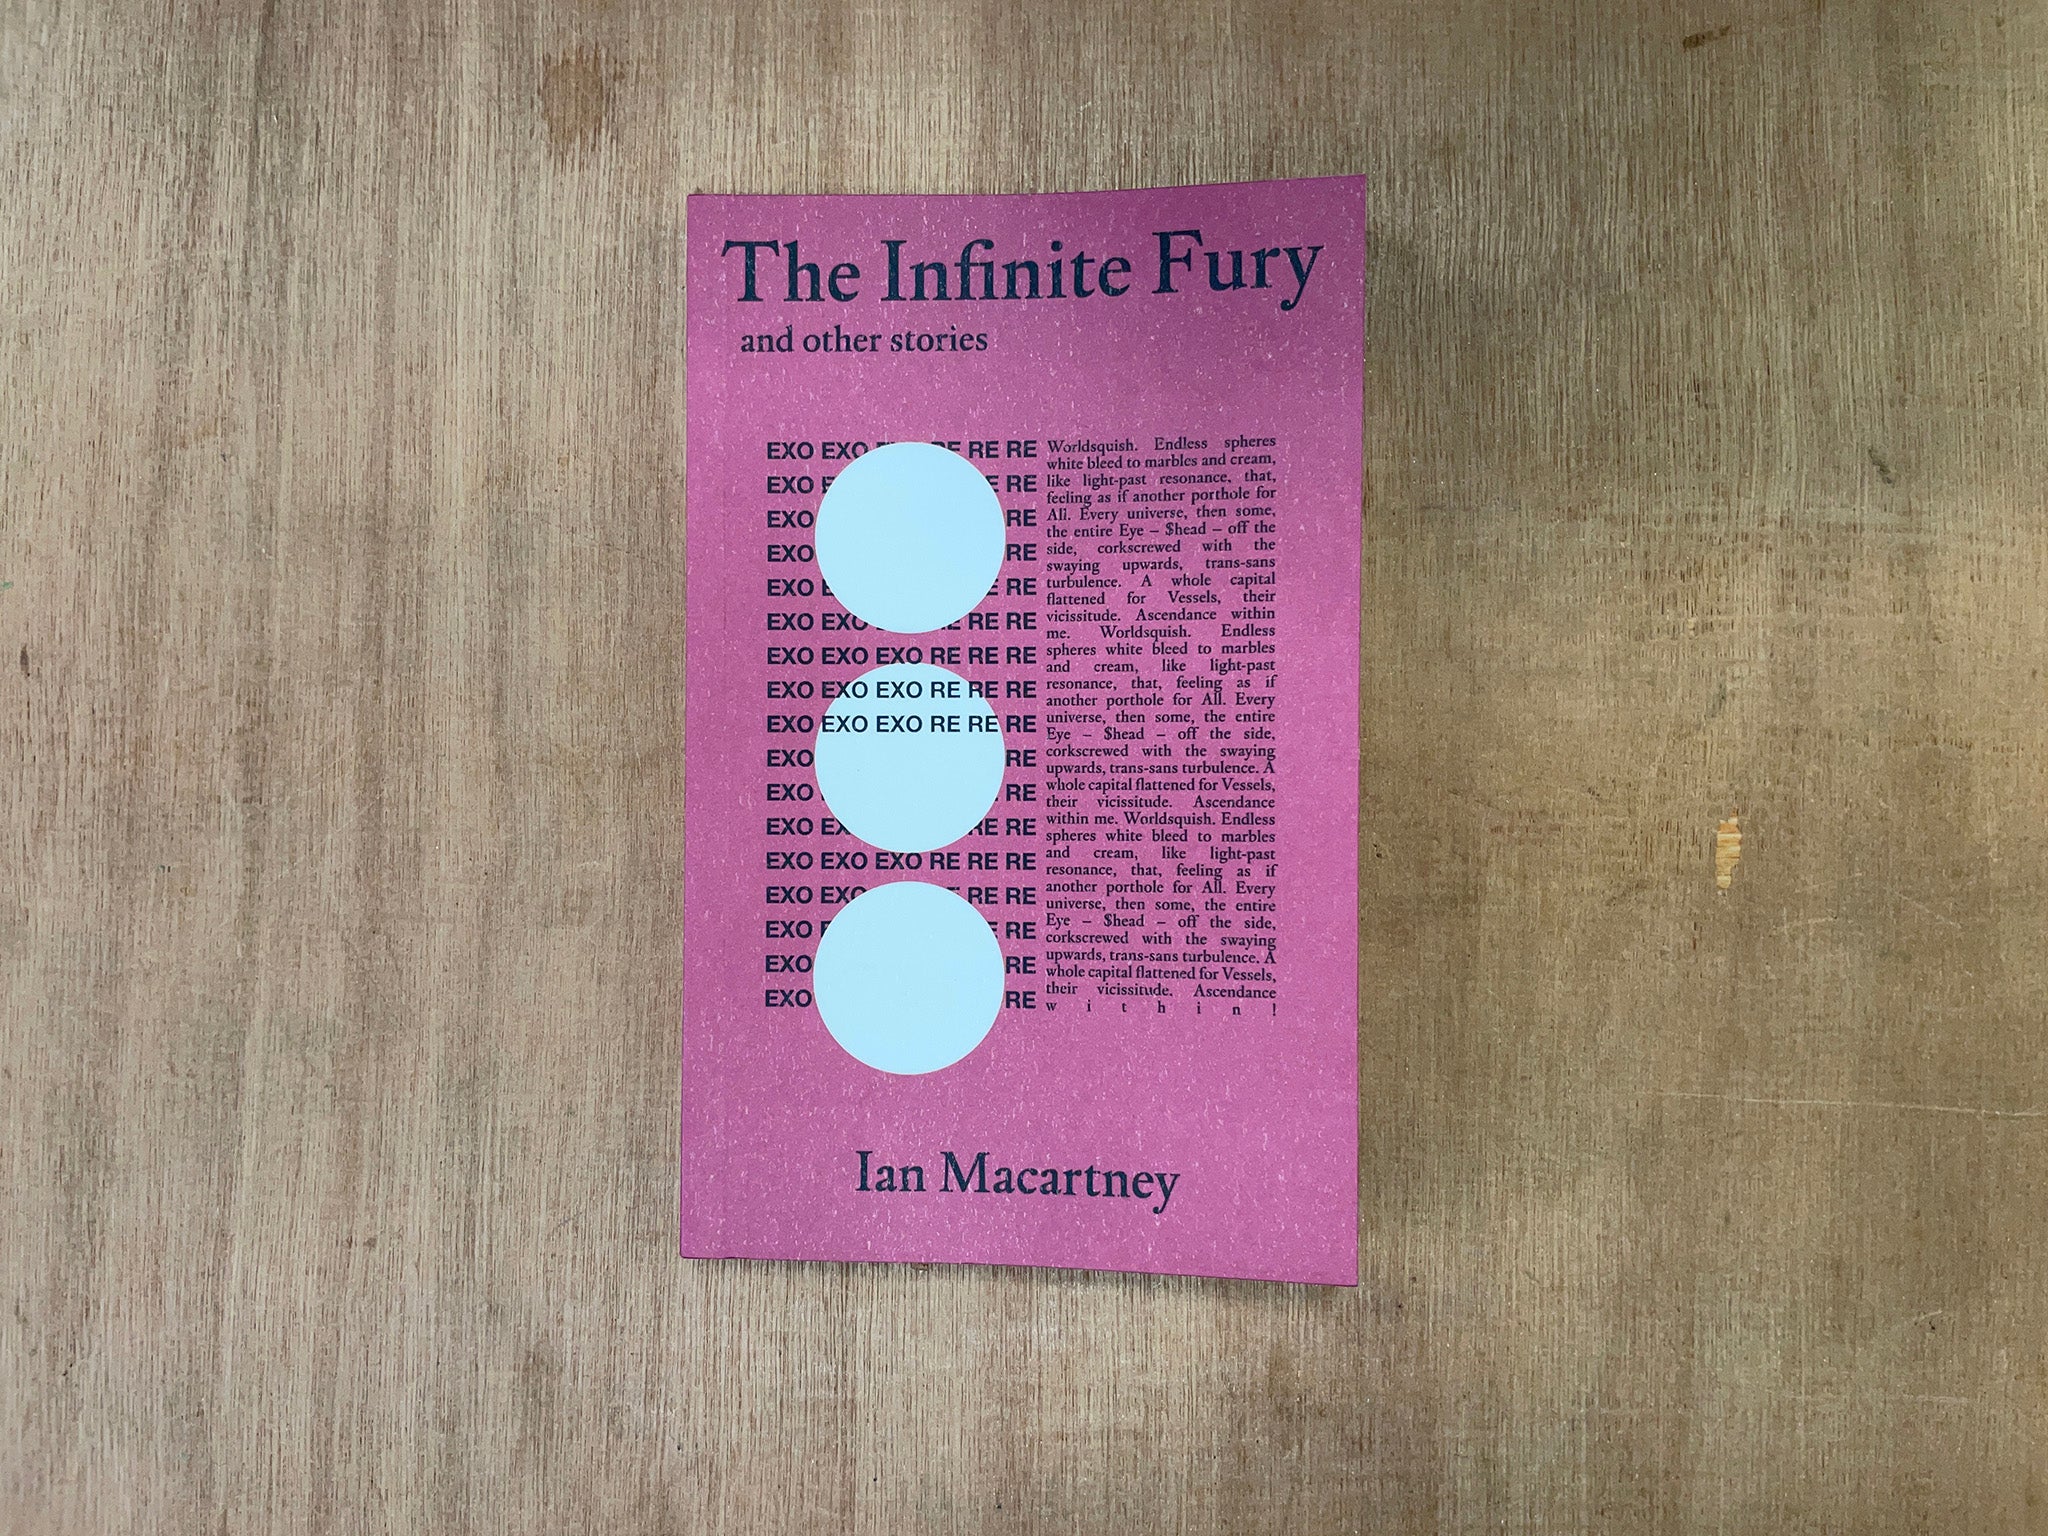 THE INFINITE FURY AND OTHER STORIES by Ian Macartney